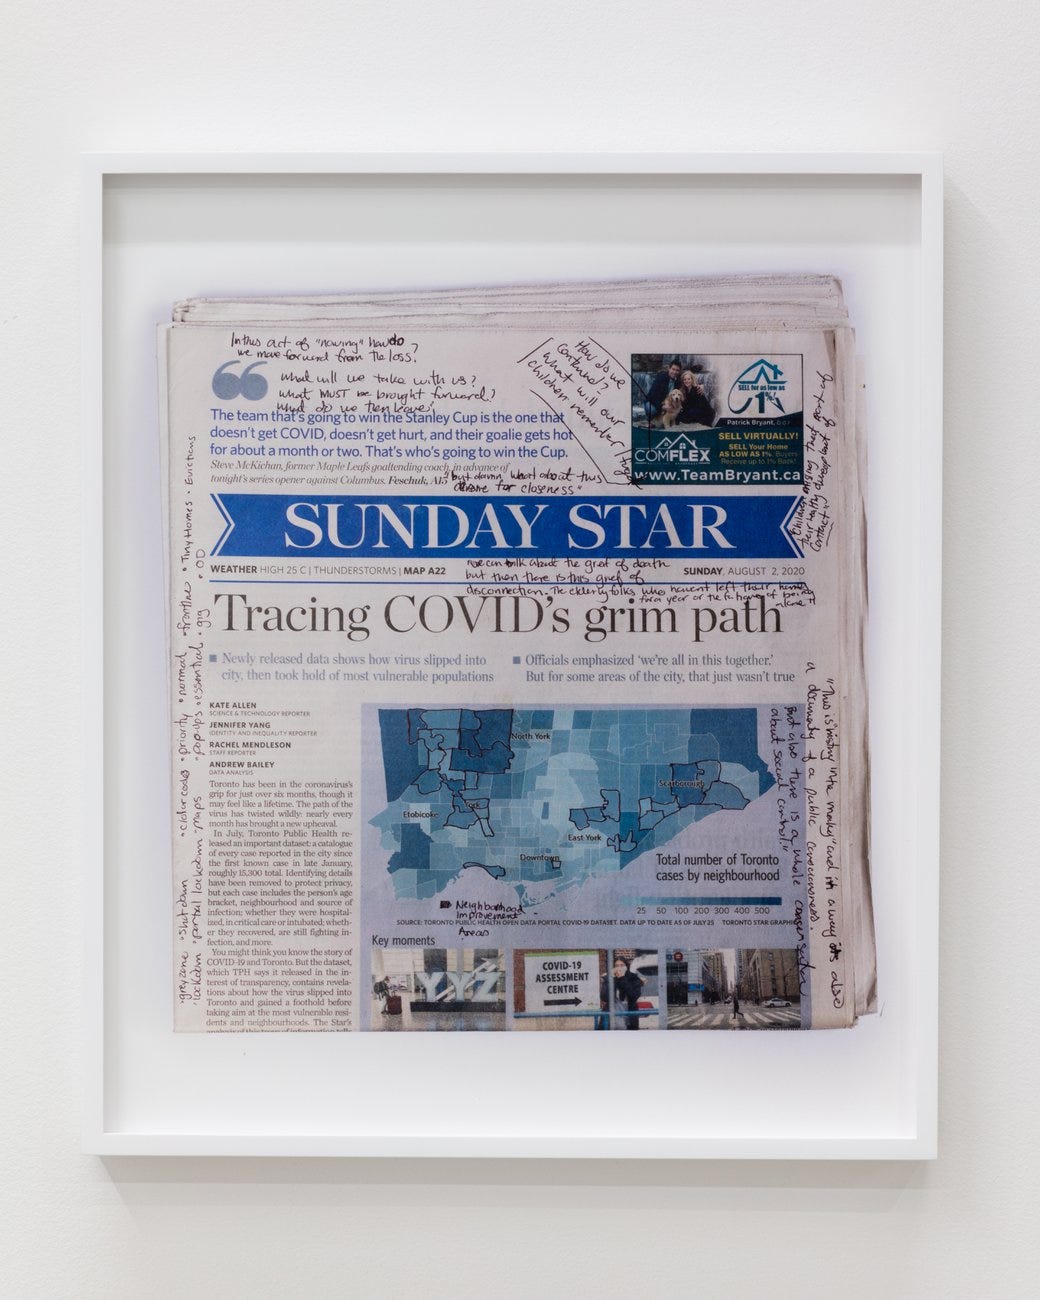 A framed copy of the Sunday Star newspaper with handwritten marginalia on a story called "Tracing COVID's grim path.'